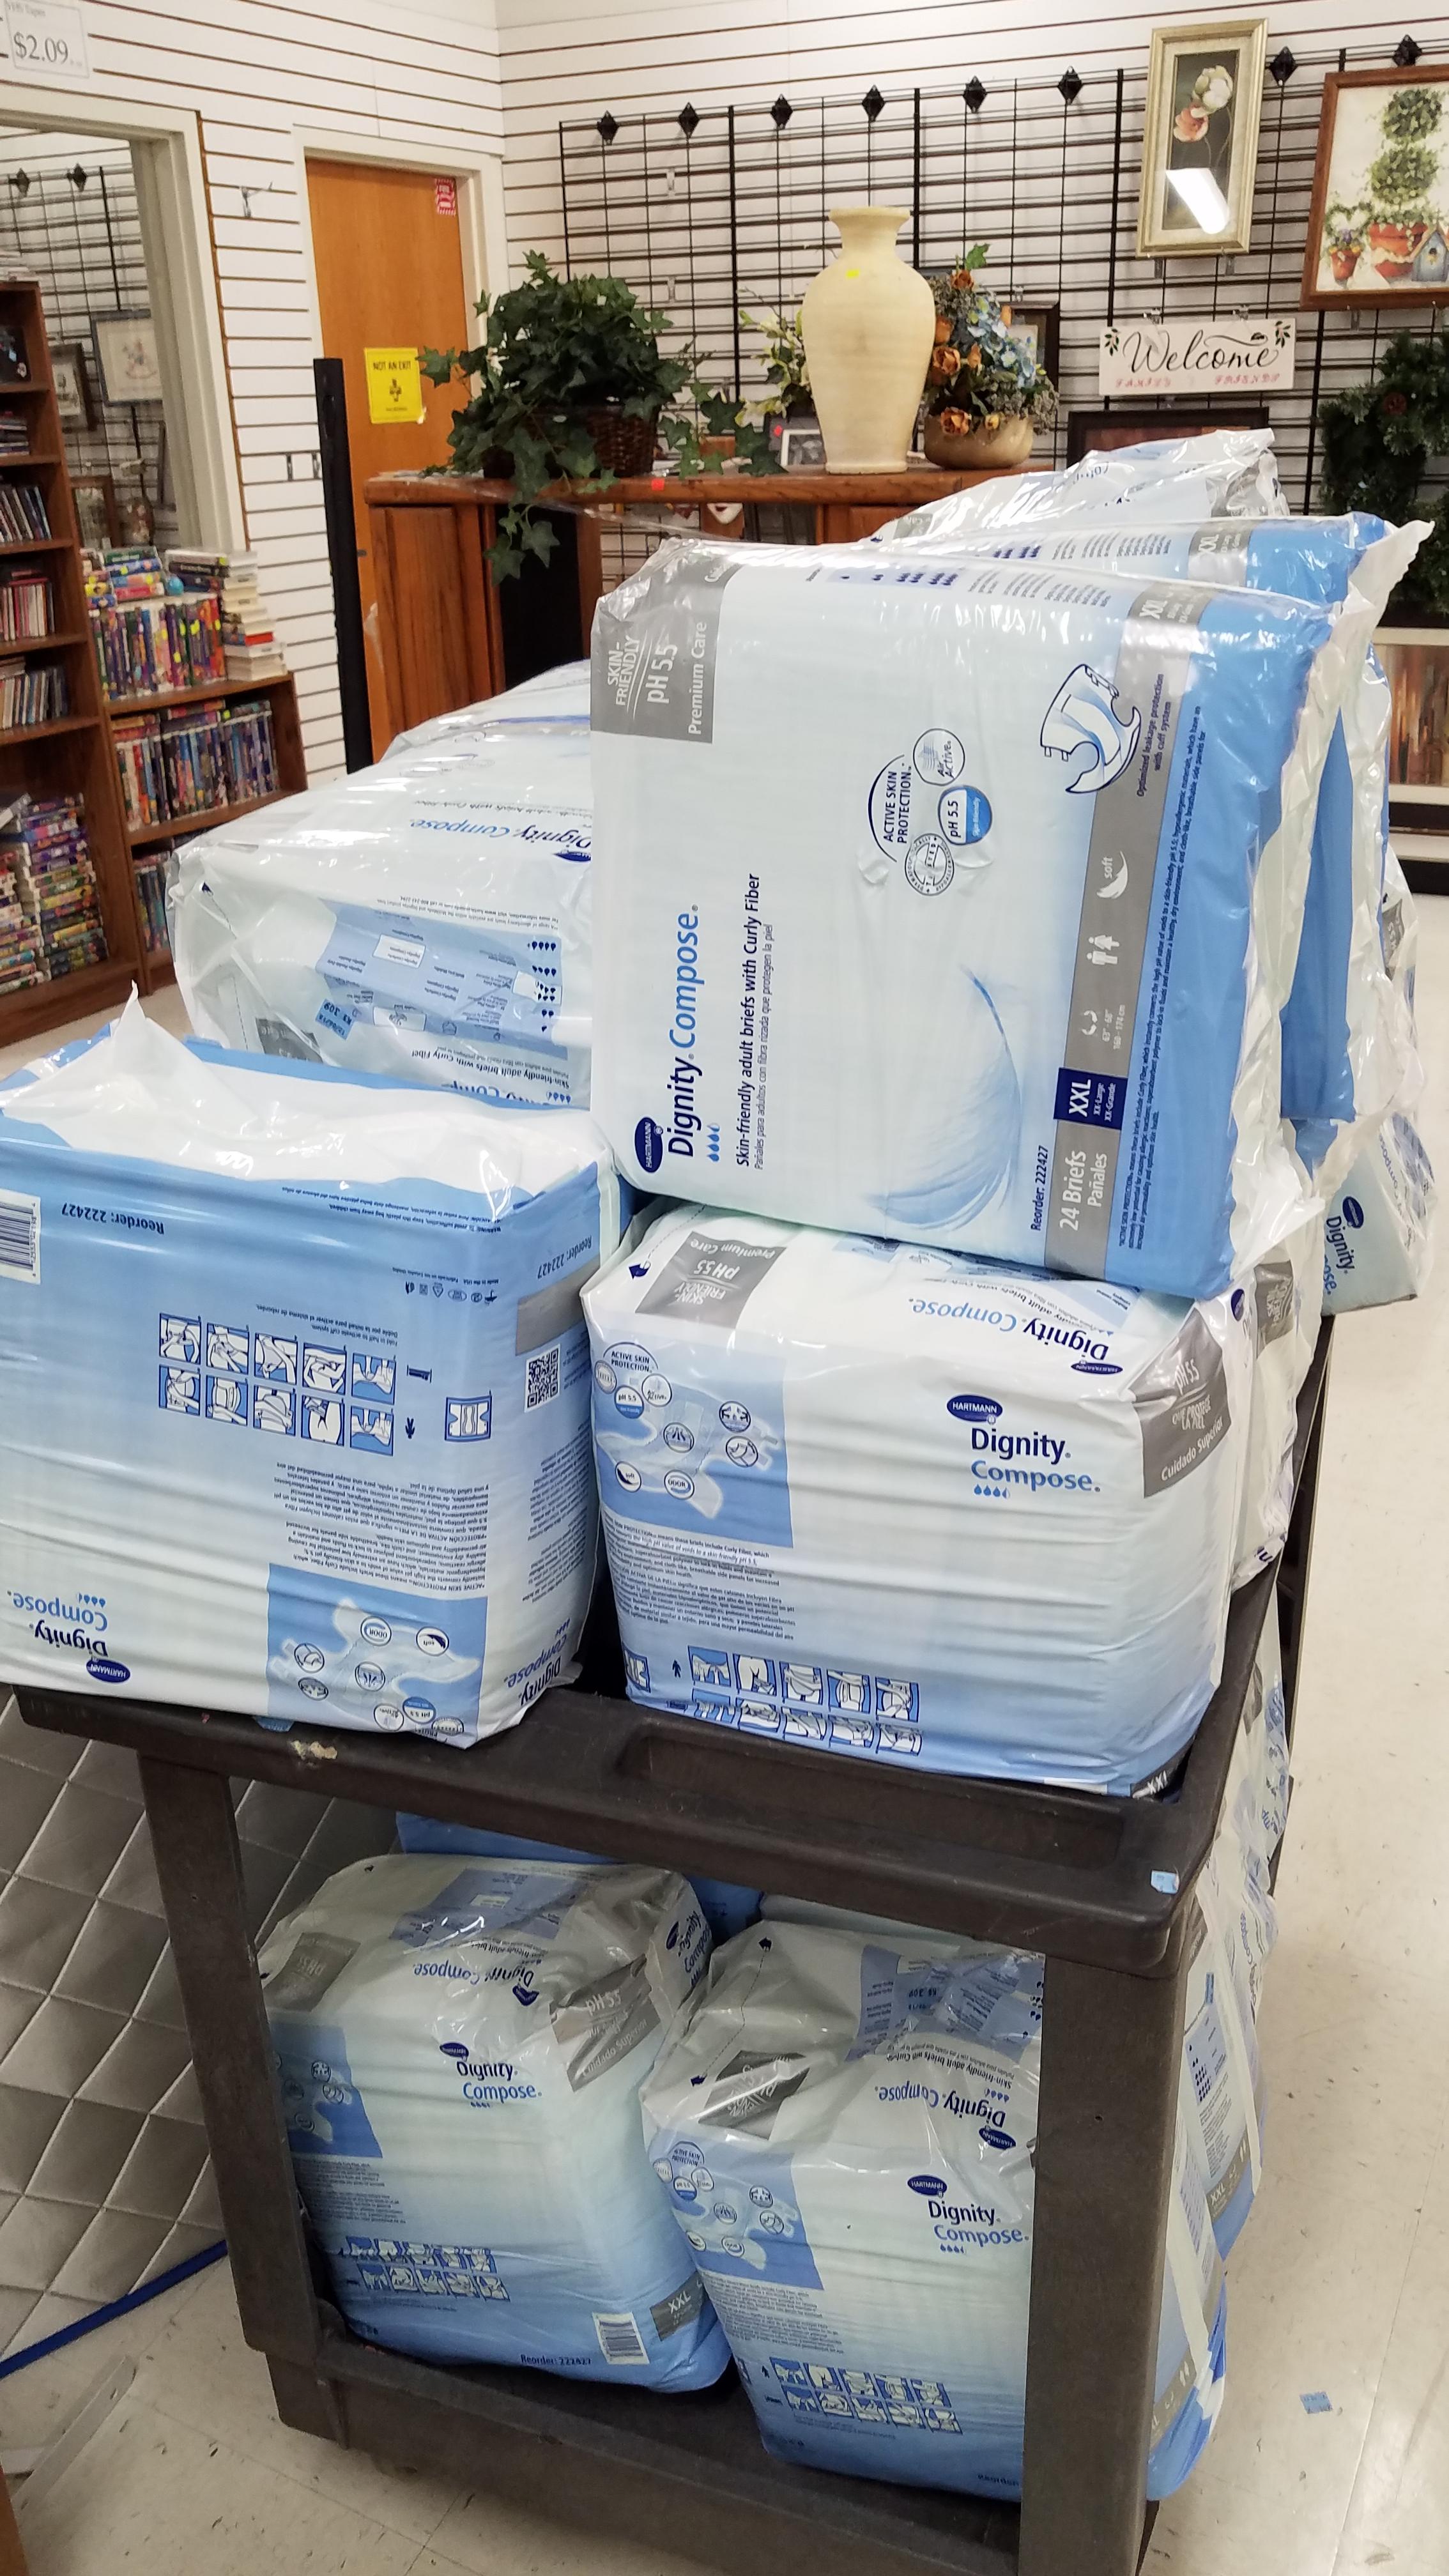 so every week i make my thrift shop rounds looking for diapers that are pla...